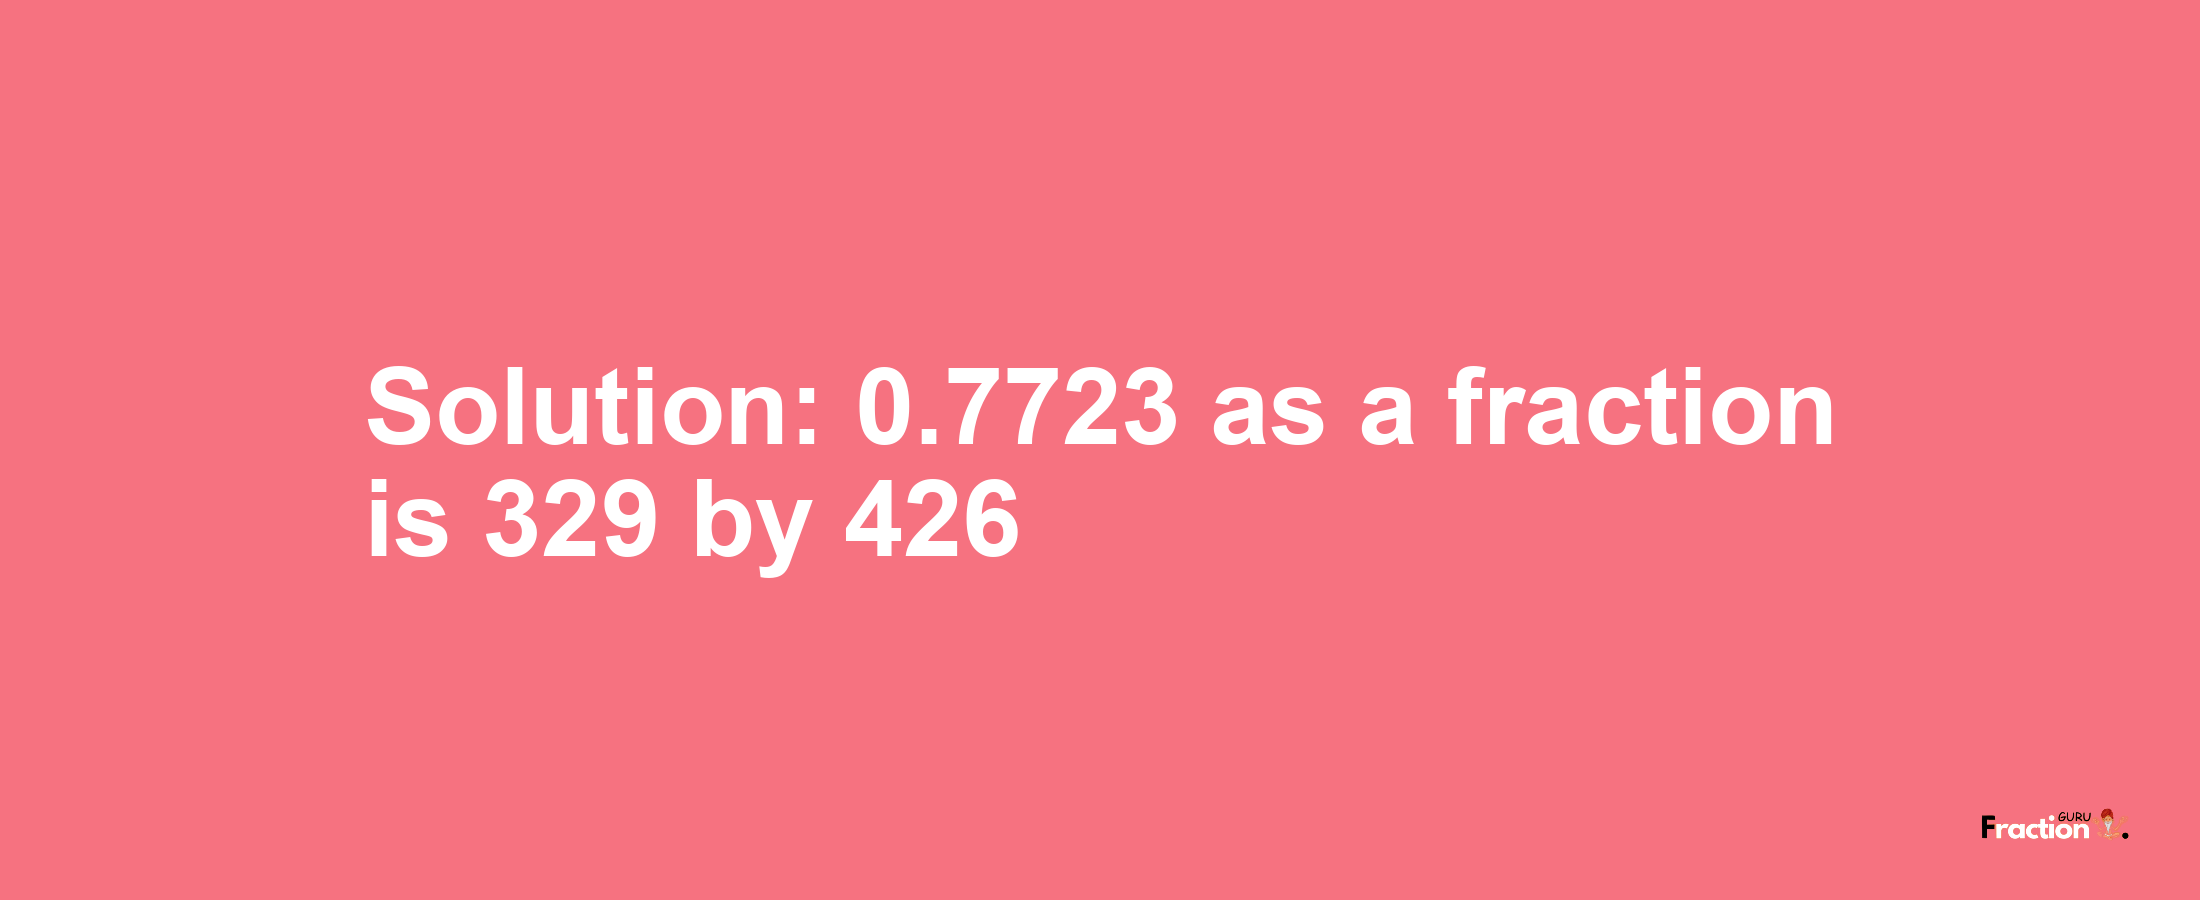 Solution:0.7723 as a fraction is 329/426